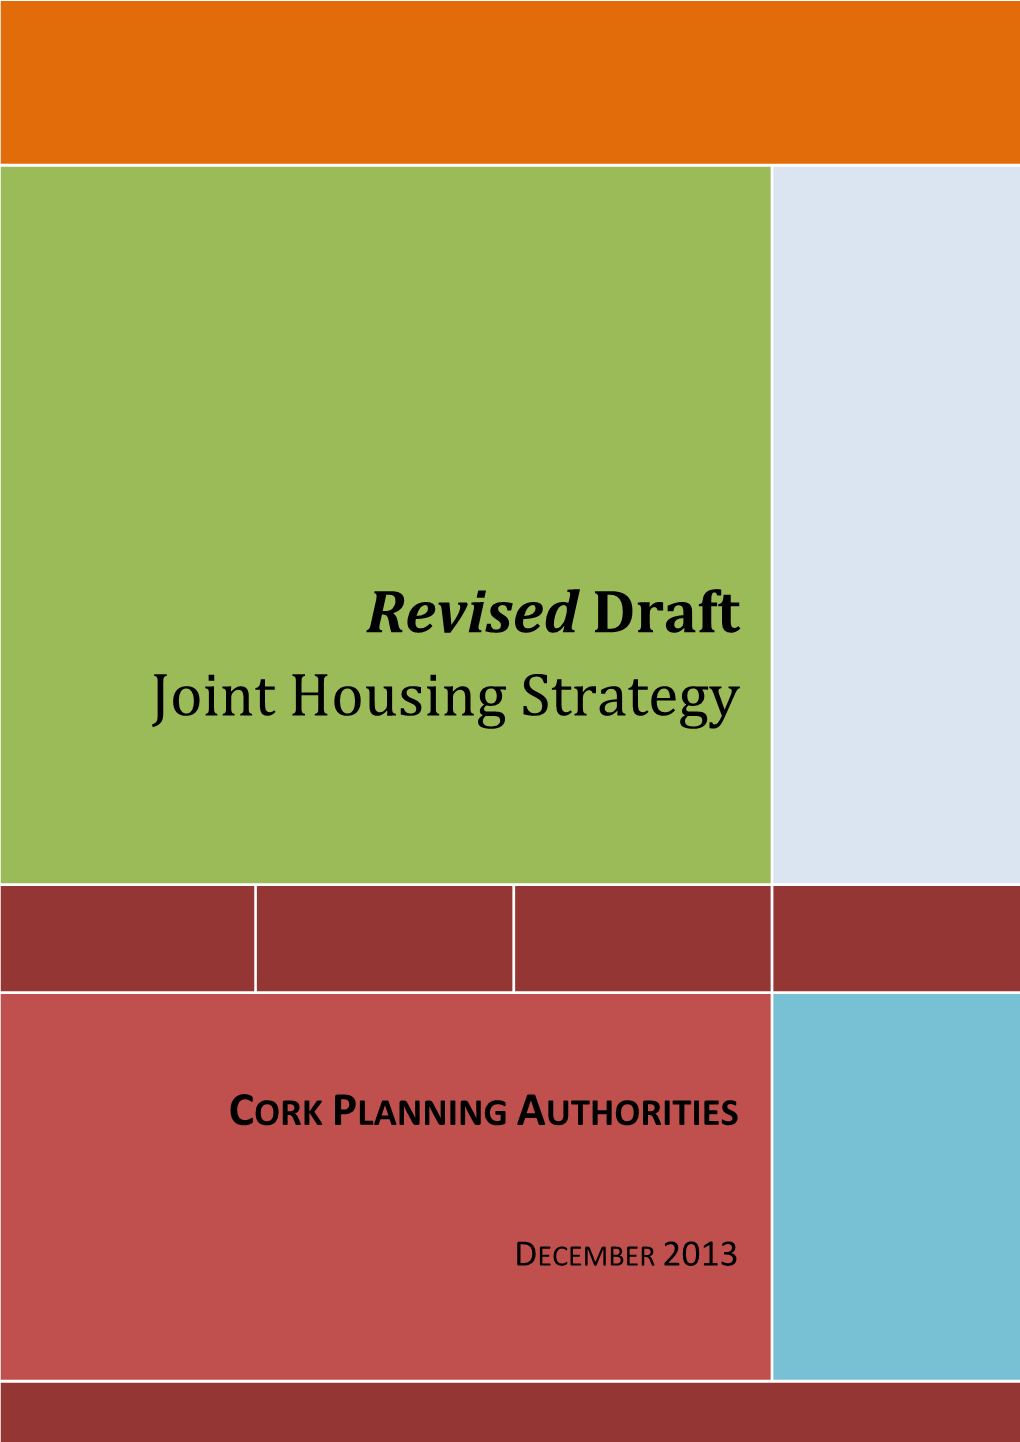 Revised Draft Joint Housing Strategy